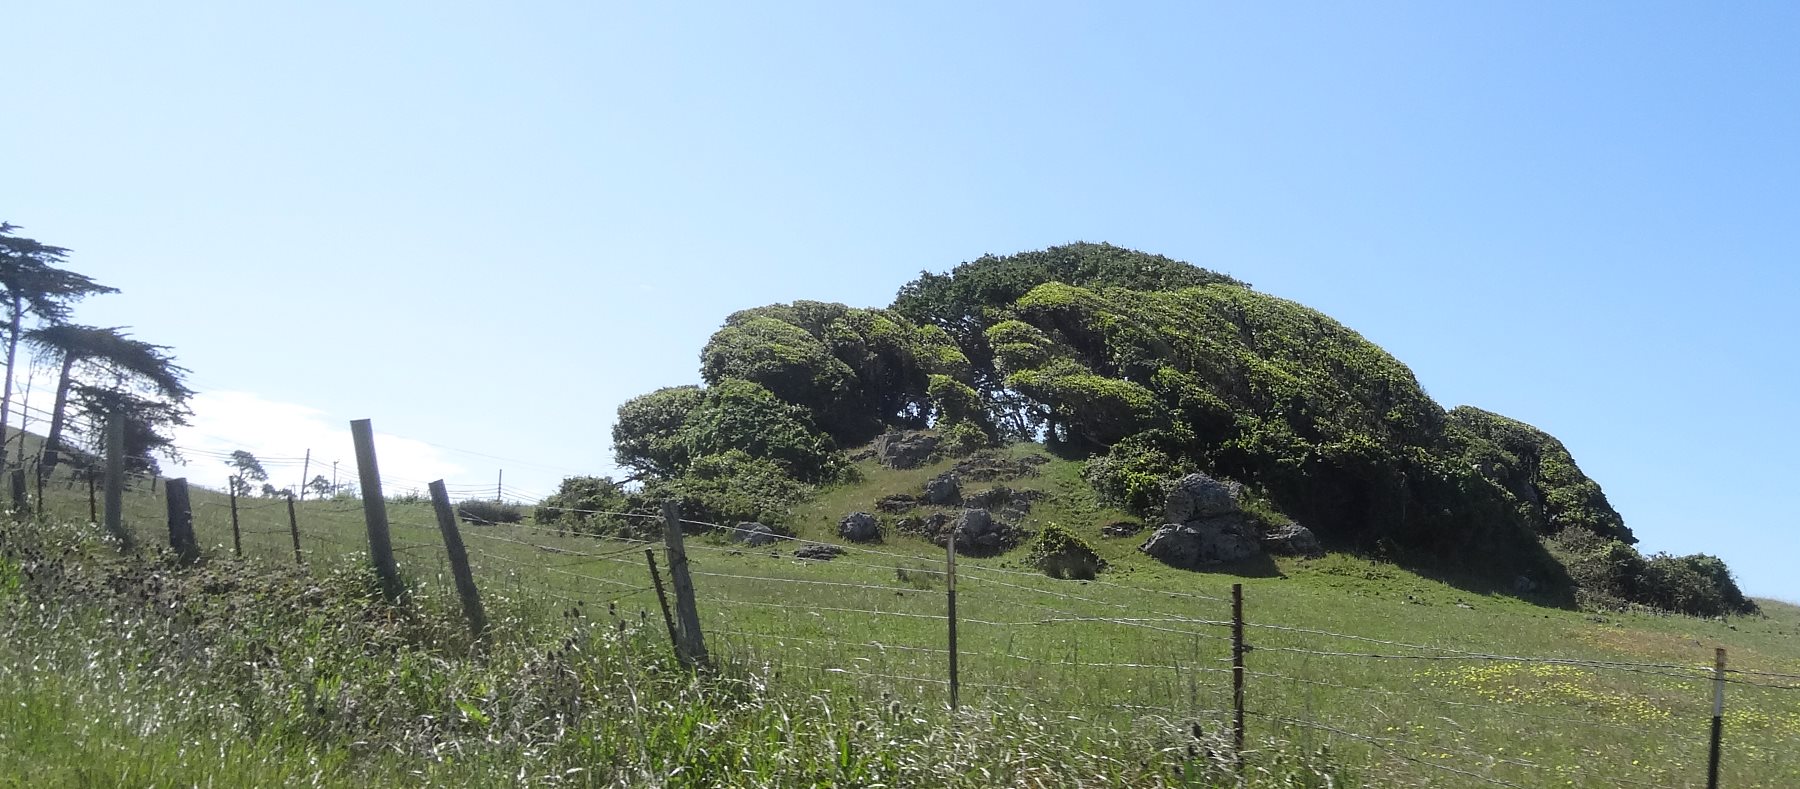 The ground rises back to pasture lands and tree covered knolls where the rocky bones of the Earth poke through.